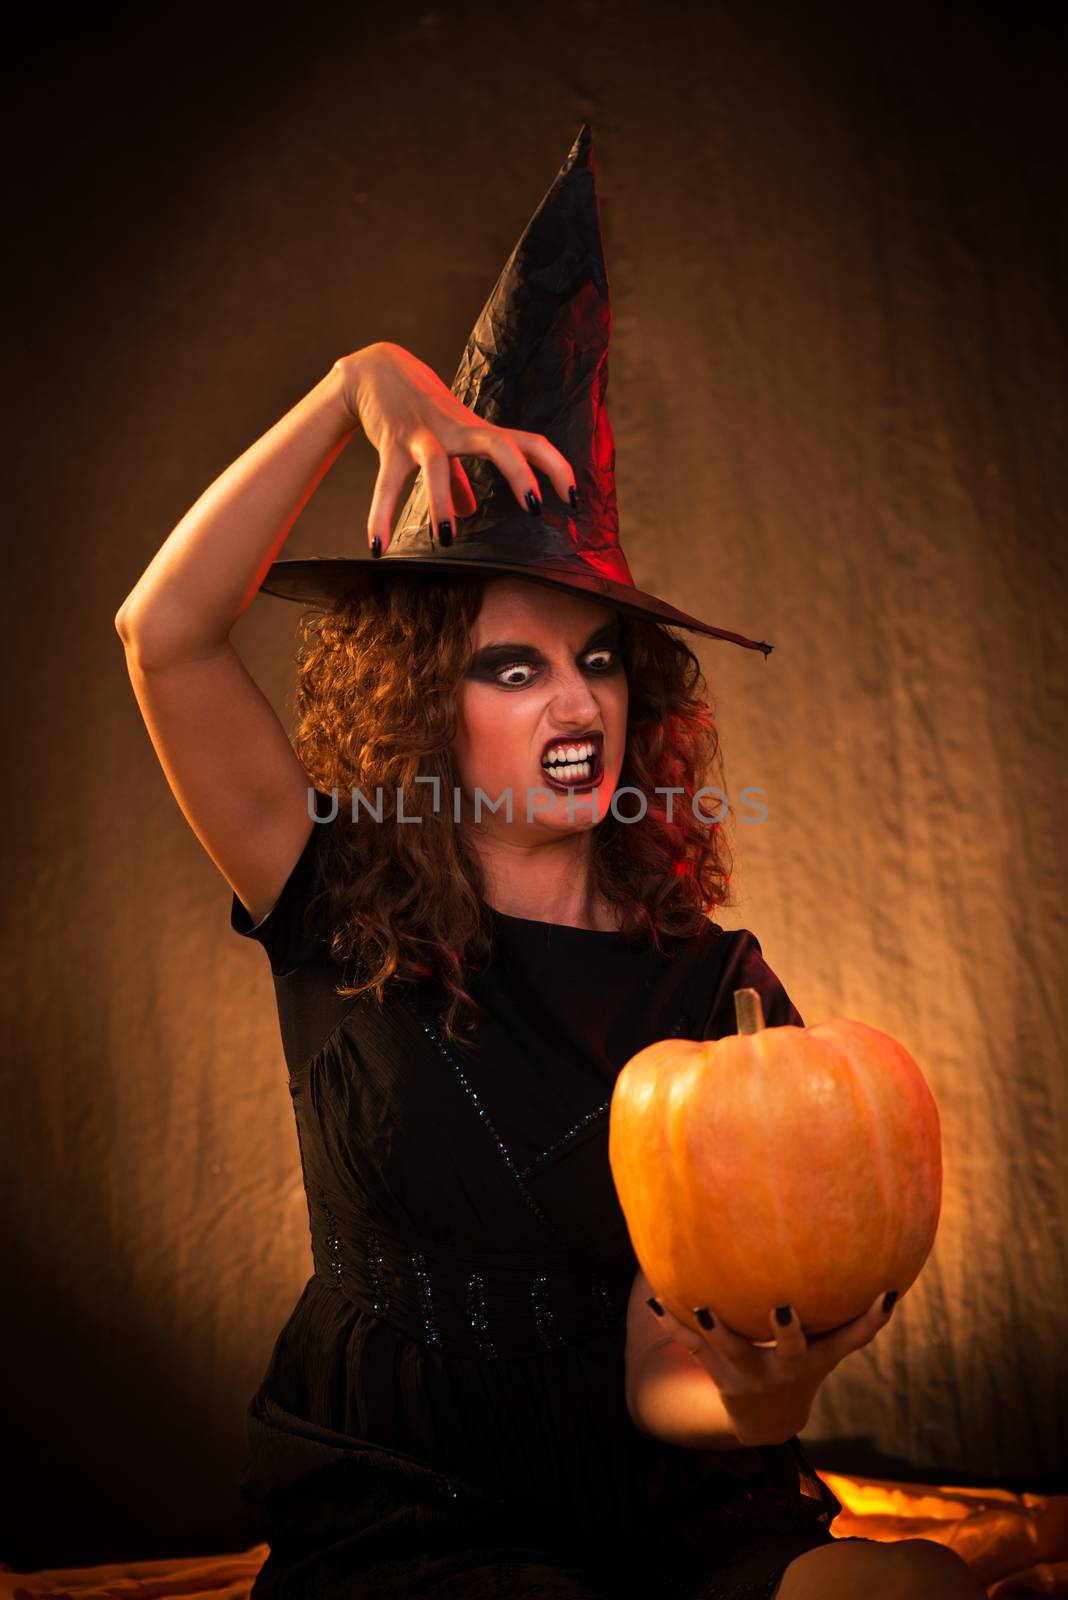 Young woman with evil face dressed like a witch. She wears dark clothing and holding a pumpkin in hand.